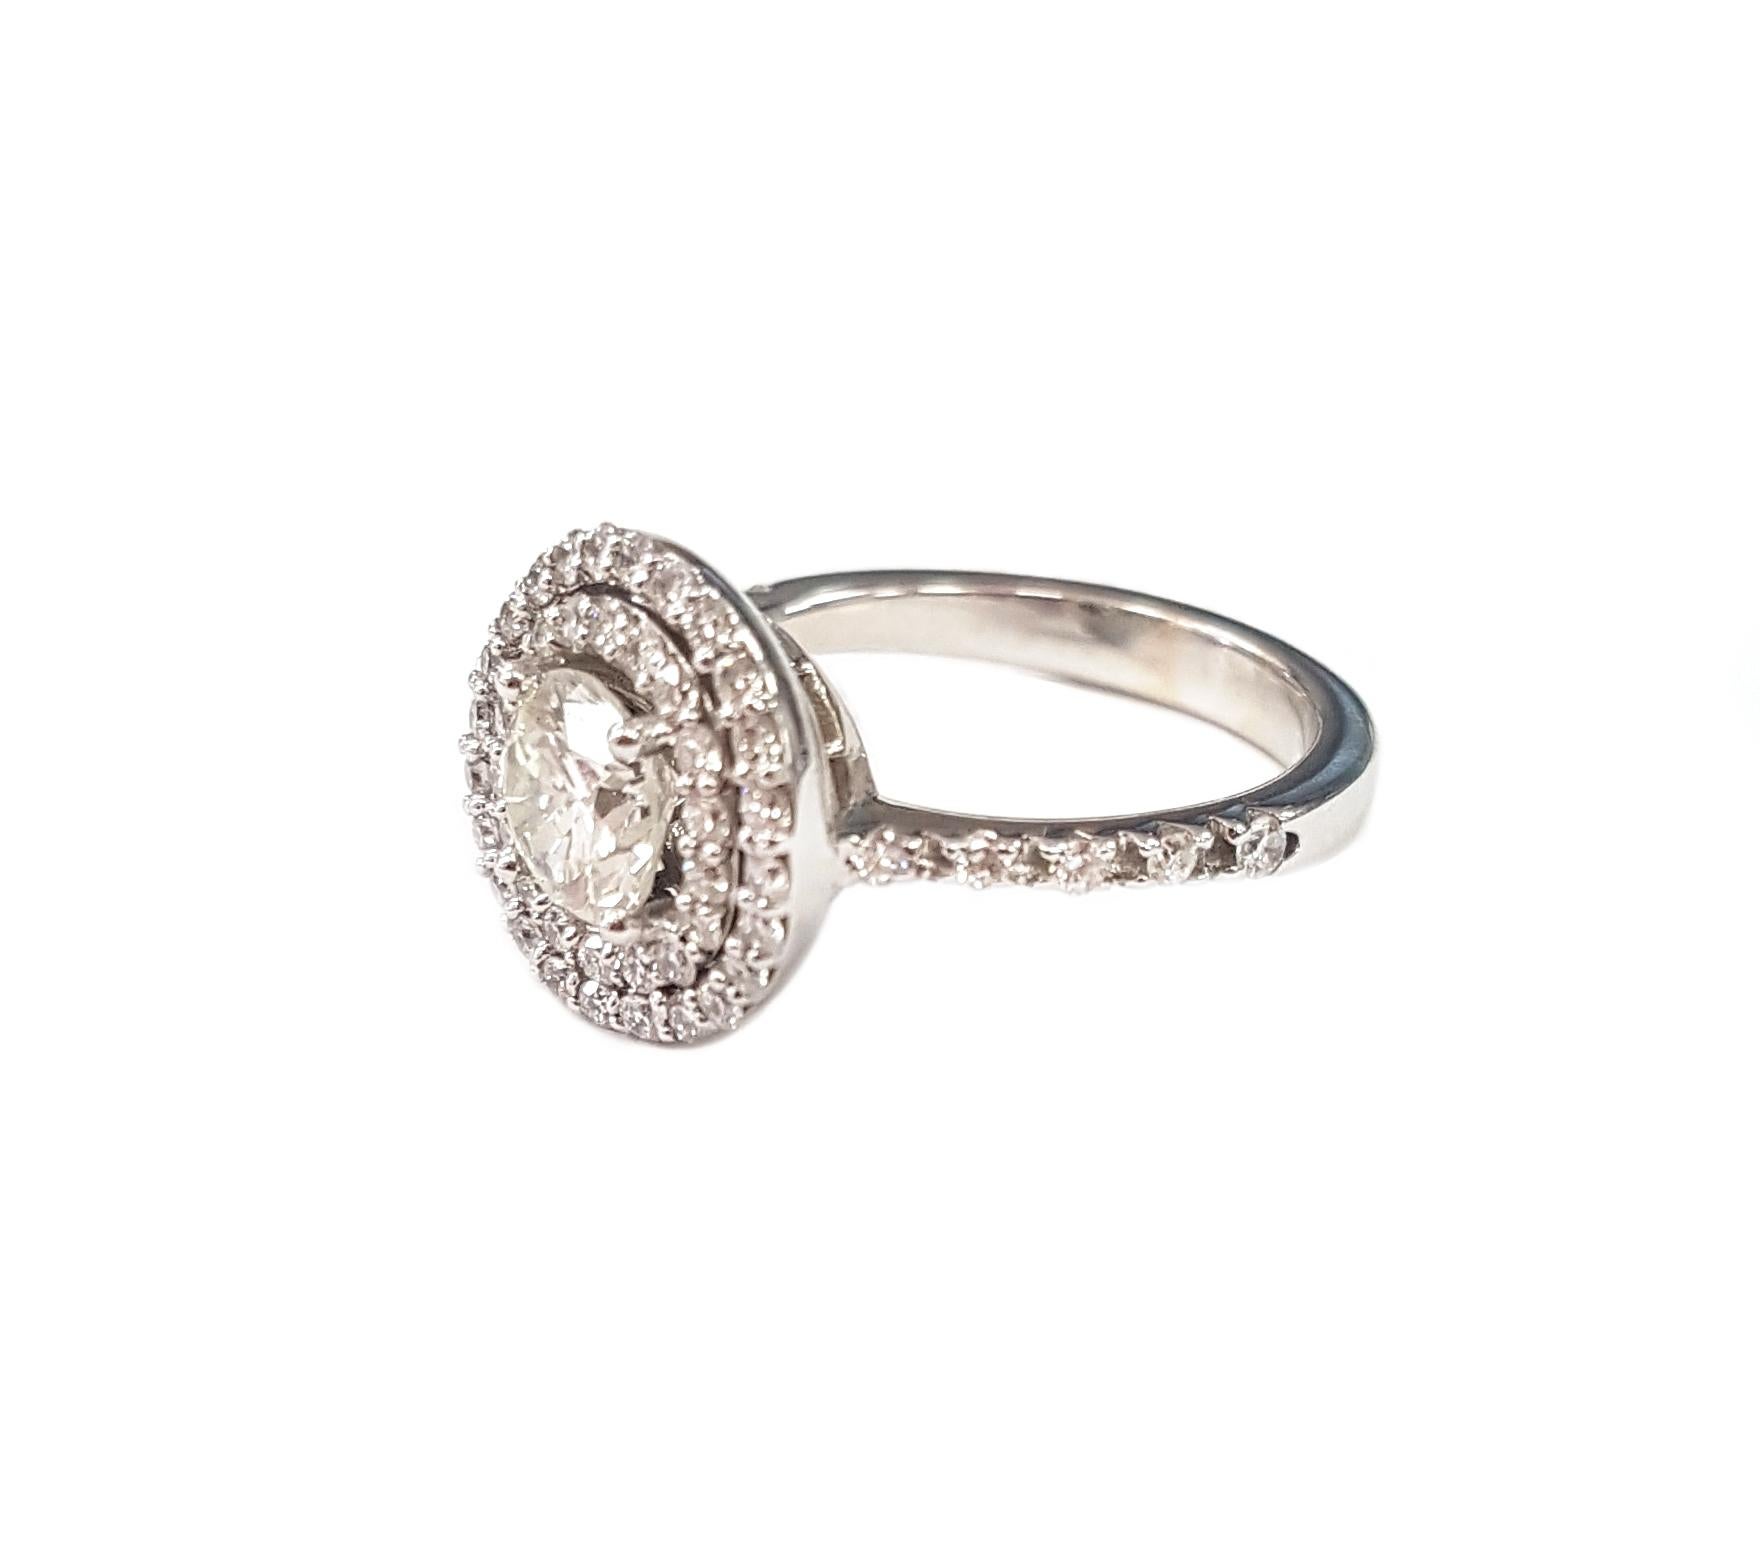 Designed around a central diamond, the double halo and pavé-set band are knockout gorgeous in 18-karat white gold.

A secret feature of the ring is that the inner halo and the centre stone shift and move very slightly. This minimal movement makes